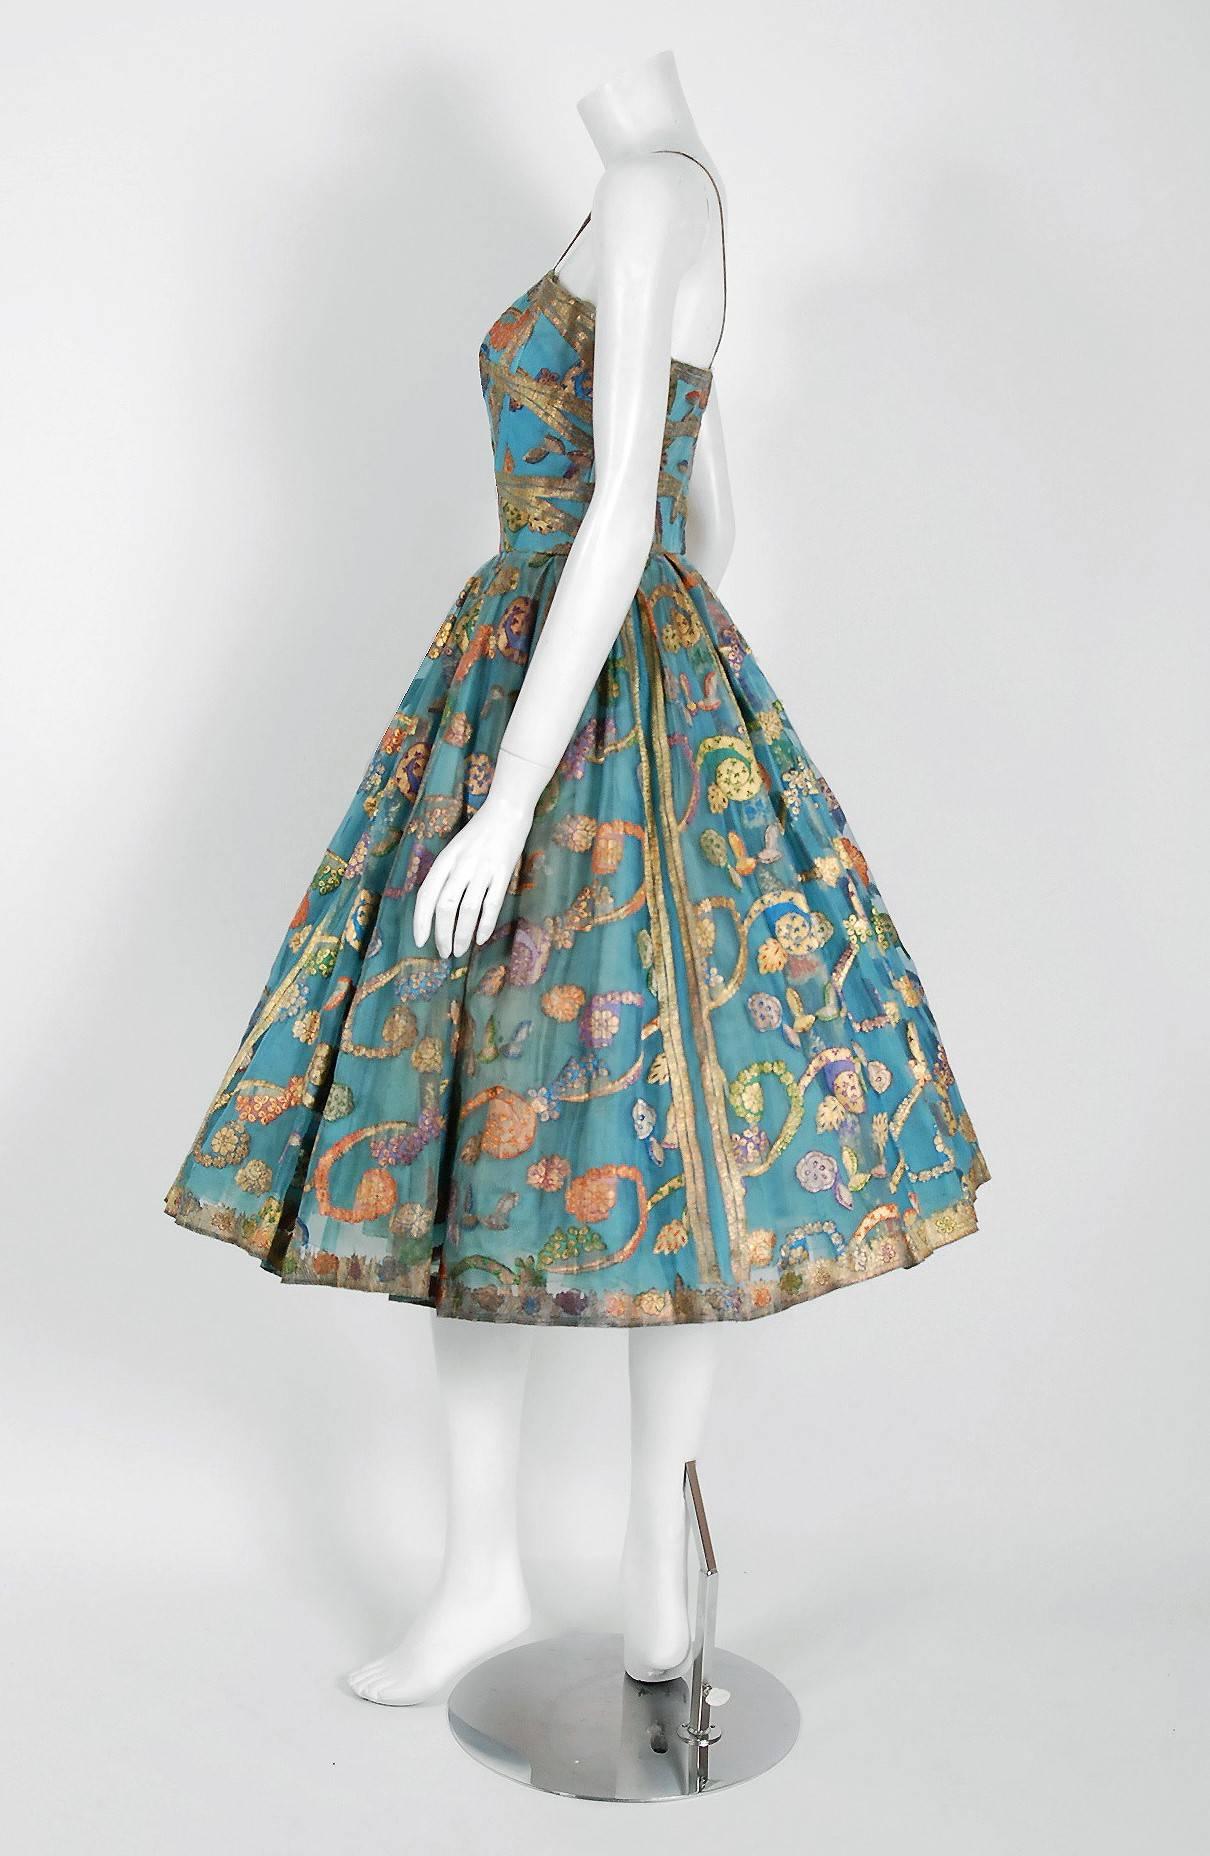 Breathtaking 1950's cocktail party dress by the highly adored label "Sophie of Saks Fifth Avenue". Sophie Gimbel was a leading designer for nearly 40 years and an innovator of the "New Look"; that gained popularity after World